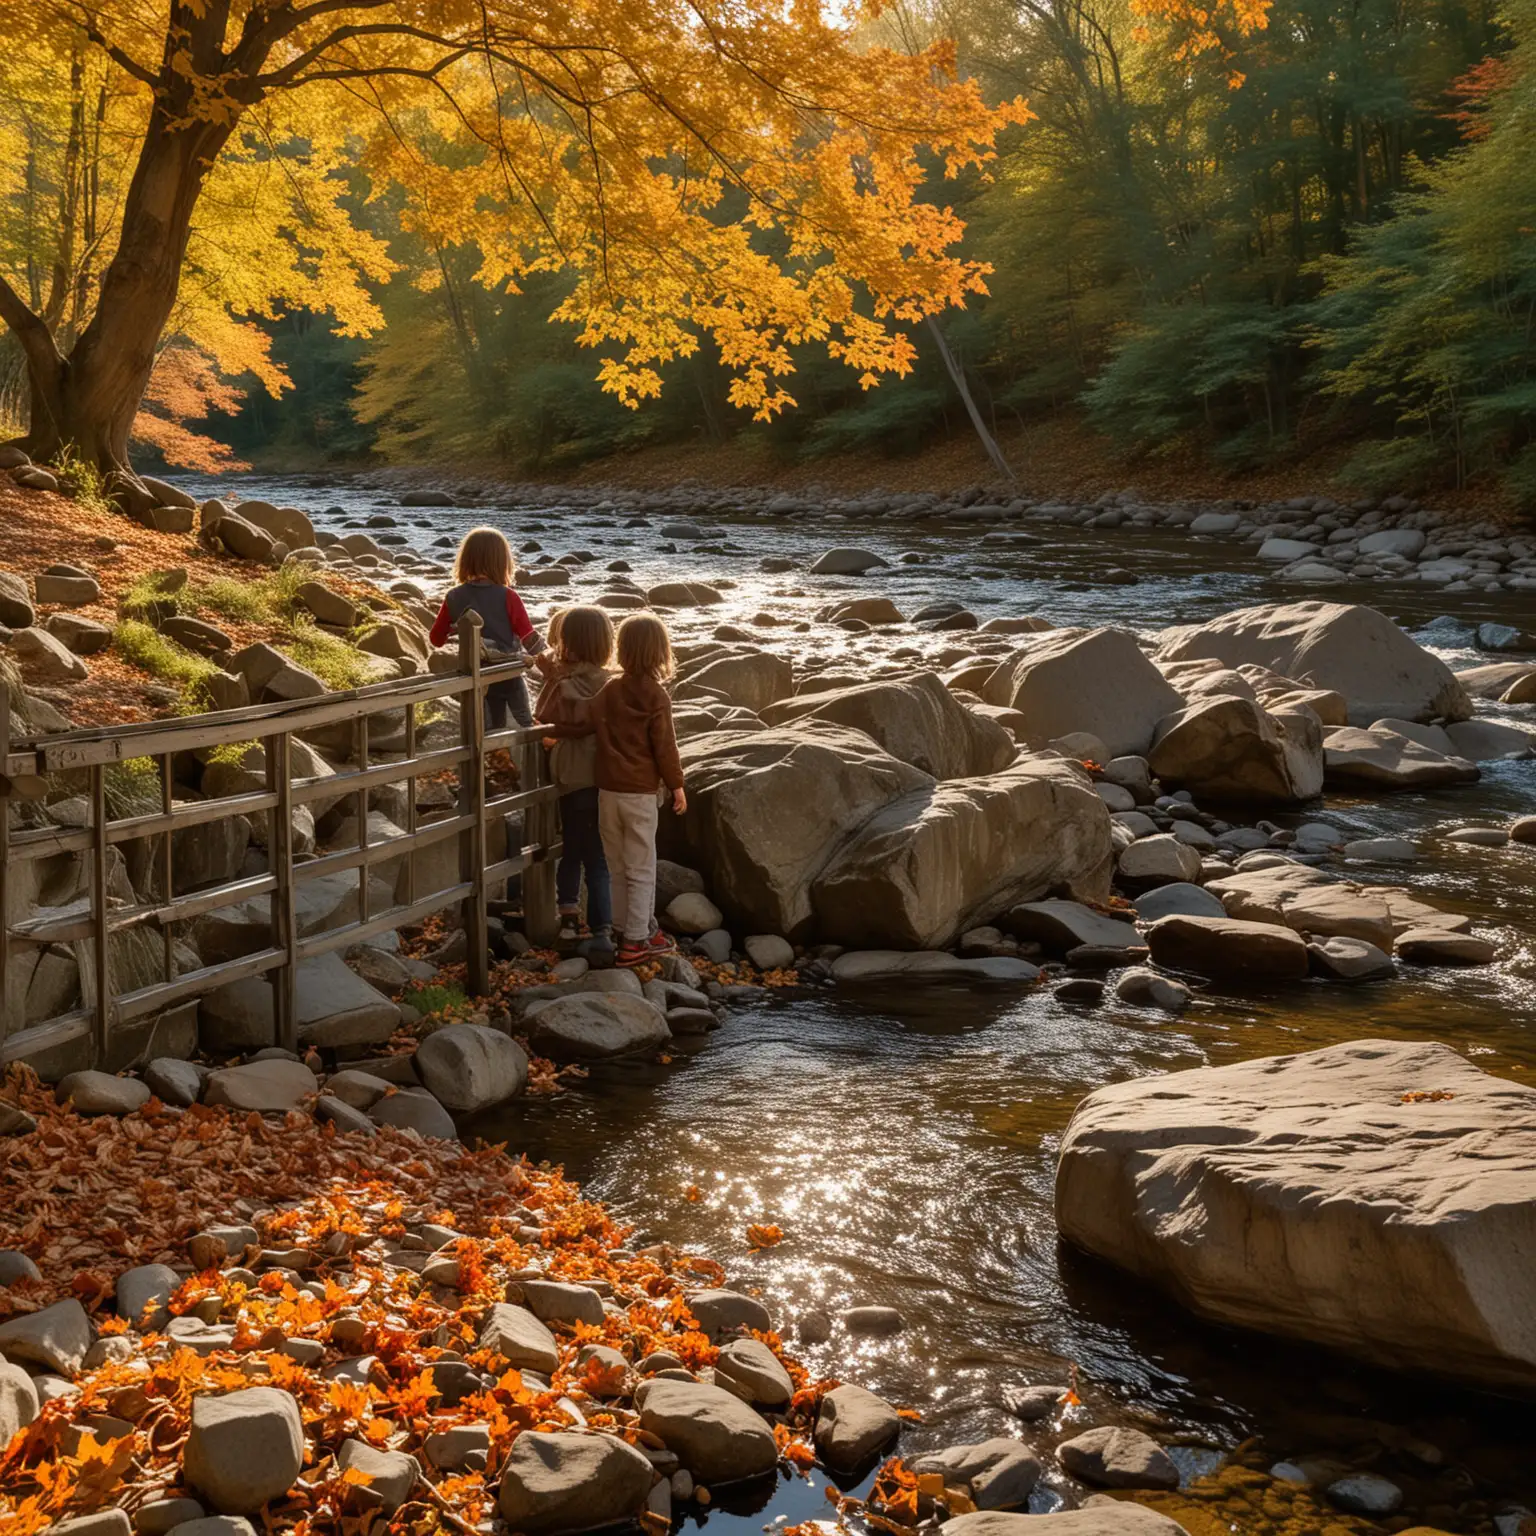 Children-Playing-by-Stream-with-Maple-Leaves-in-Evening-Sunlight